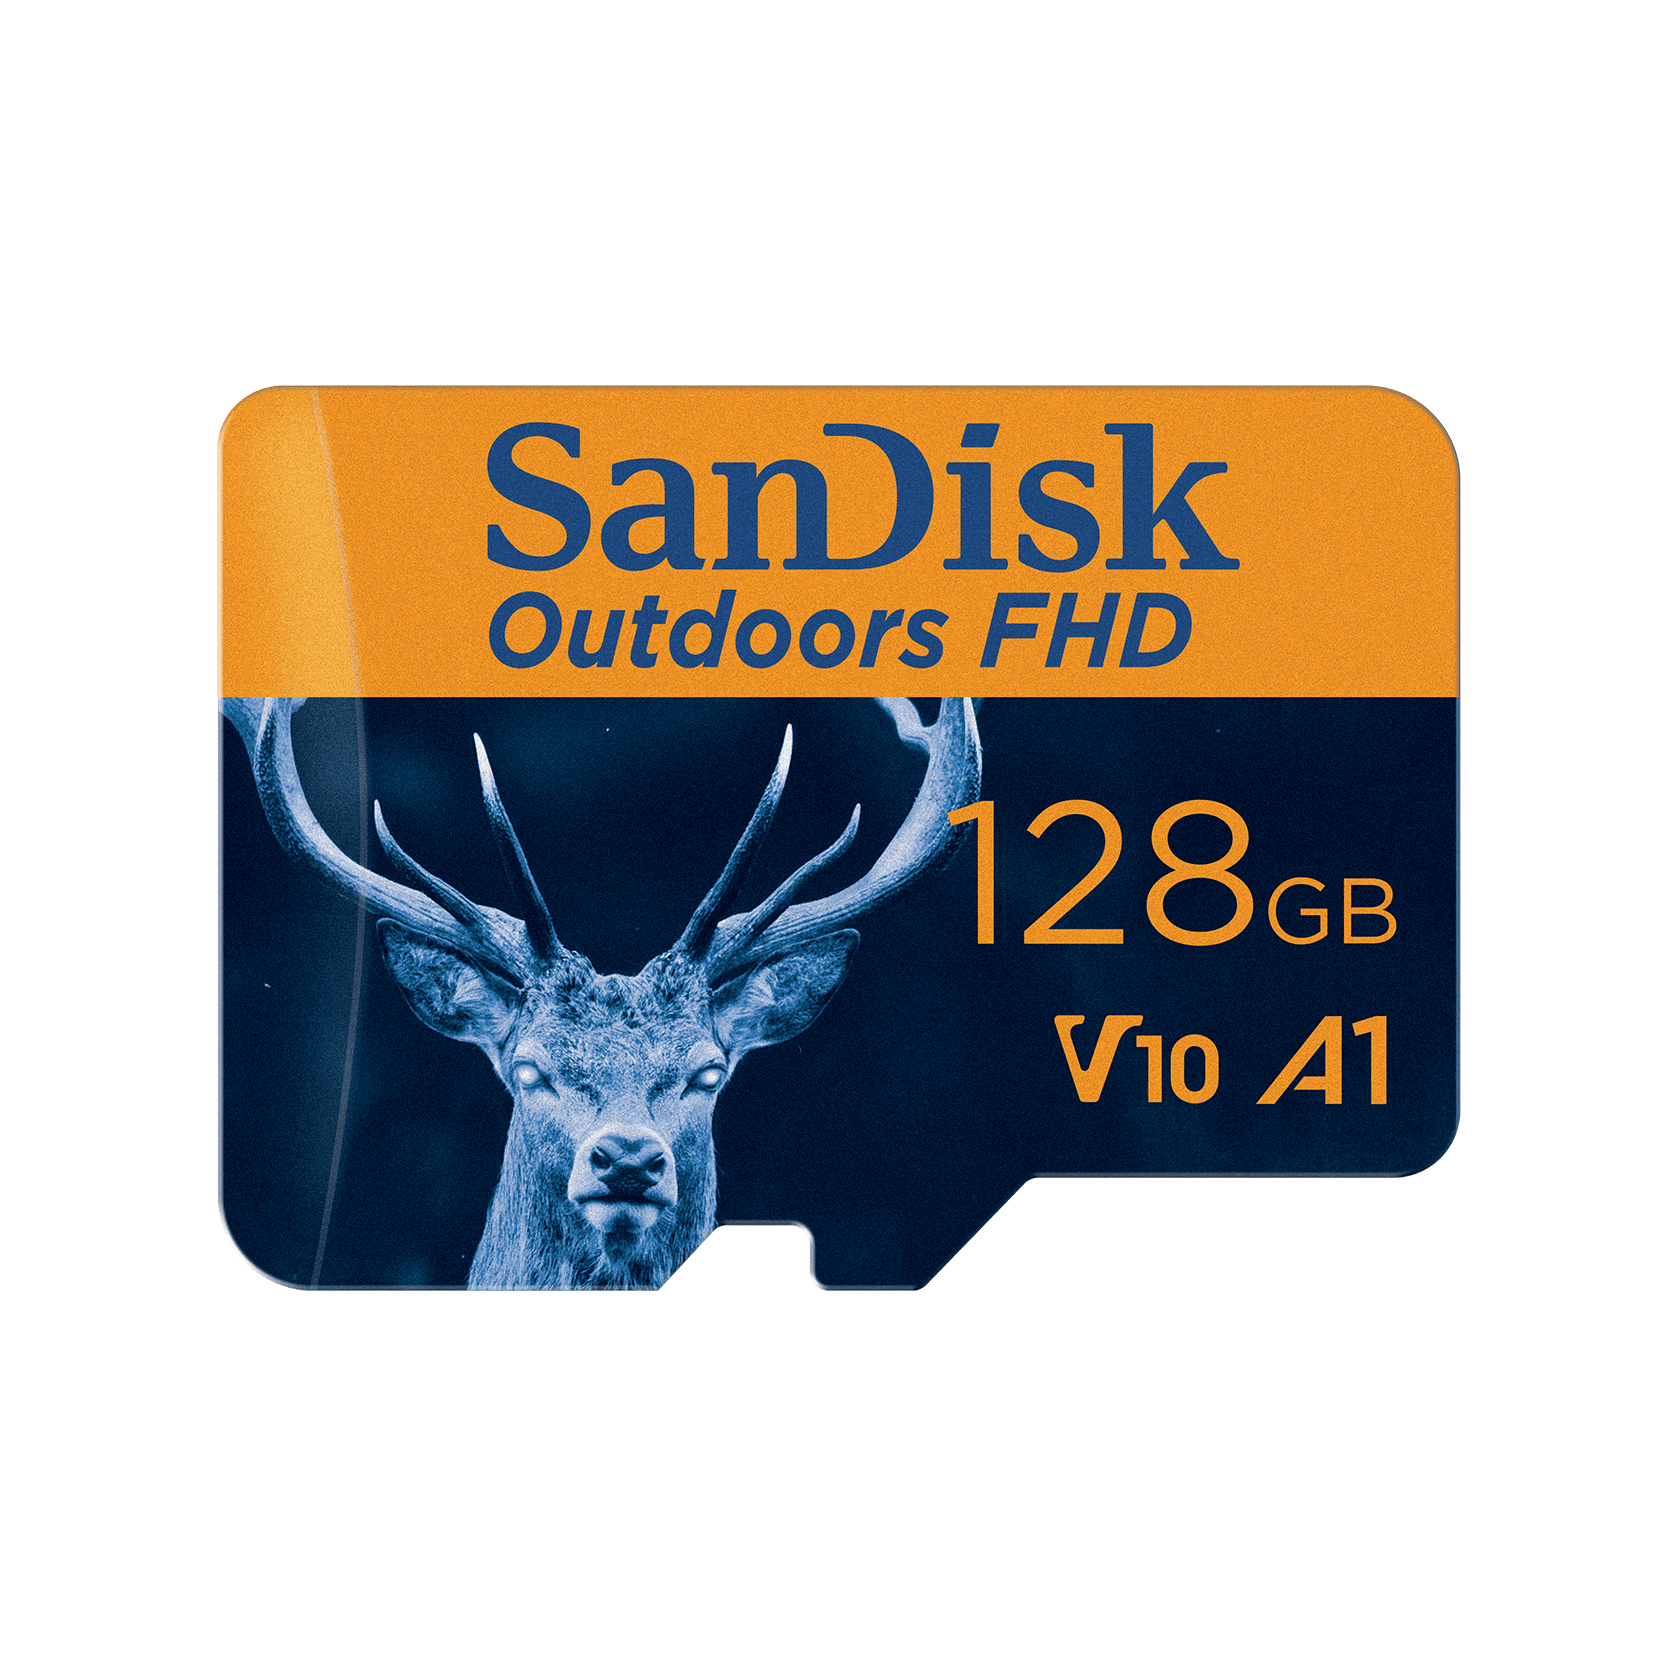 SanDisk Outdoors FHD MicroSDXC UHS-I Card with SD Adapter - 128GB Single Pack MicroSD Card - SDSQUBC-128G-GN6VA